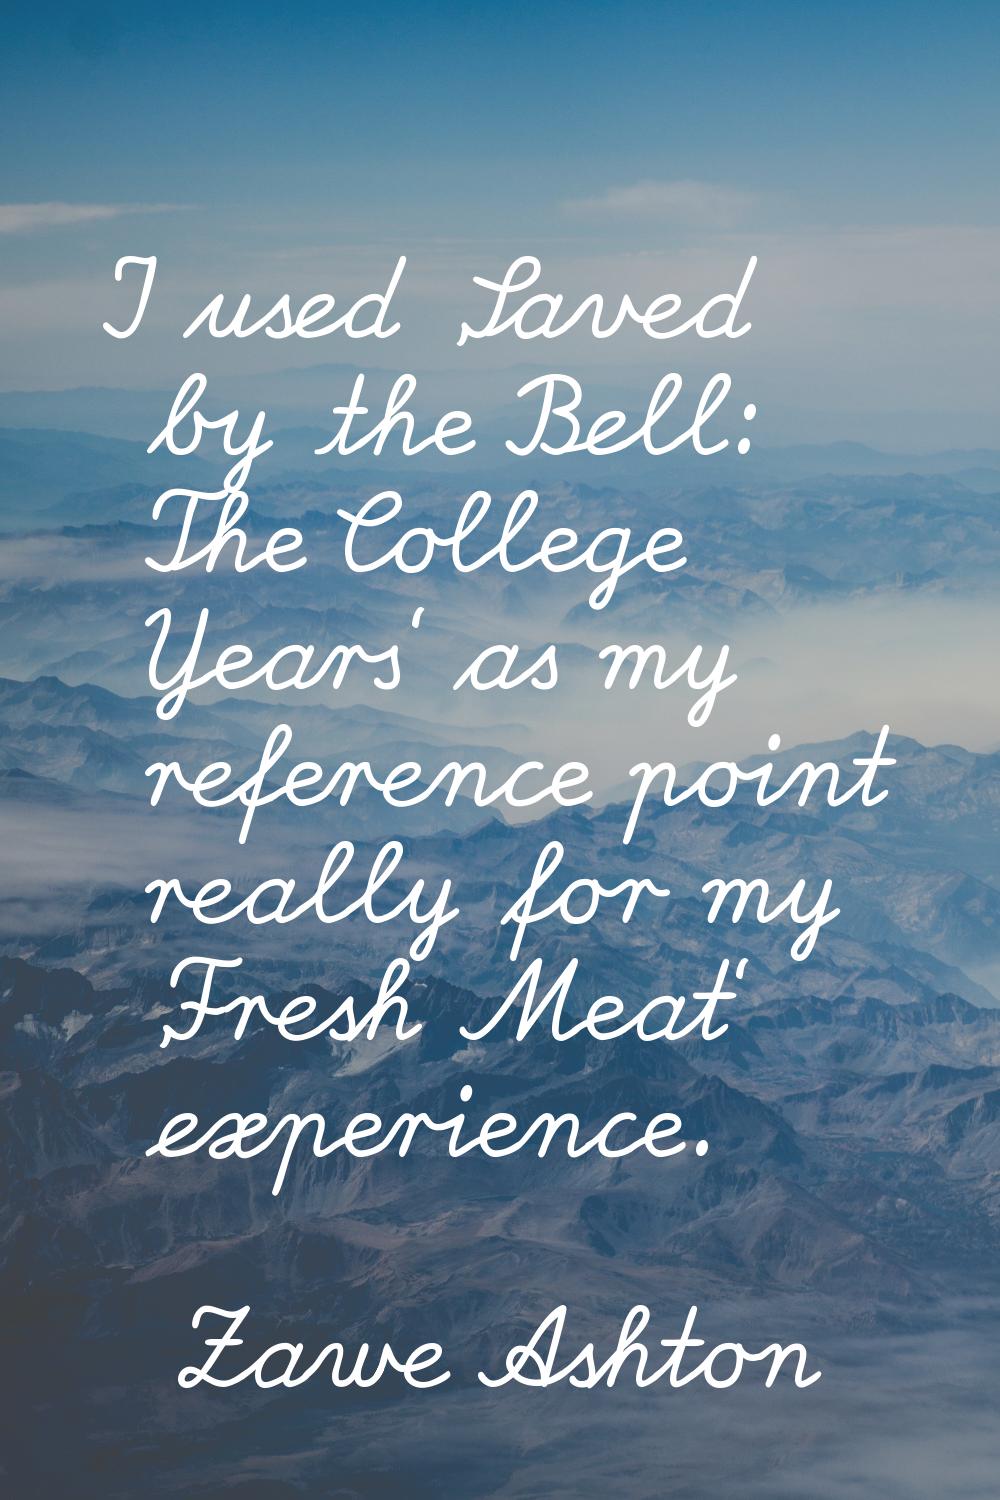 I used 'Saved by the Bell: The College Years' as my reference point really for my 'Fresh Meat' expe